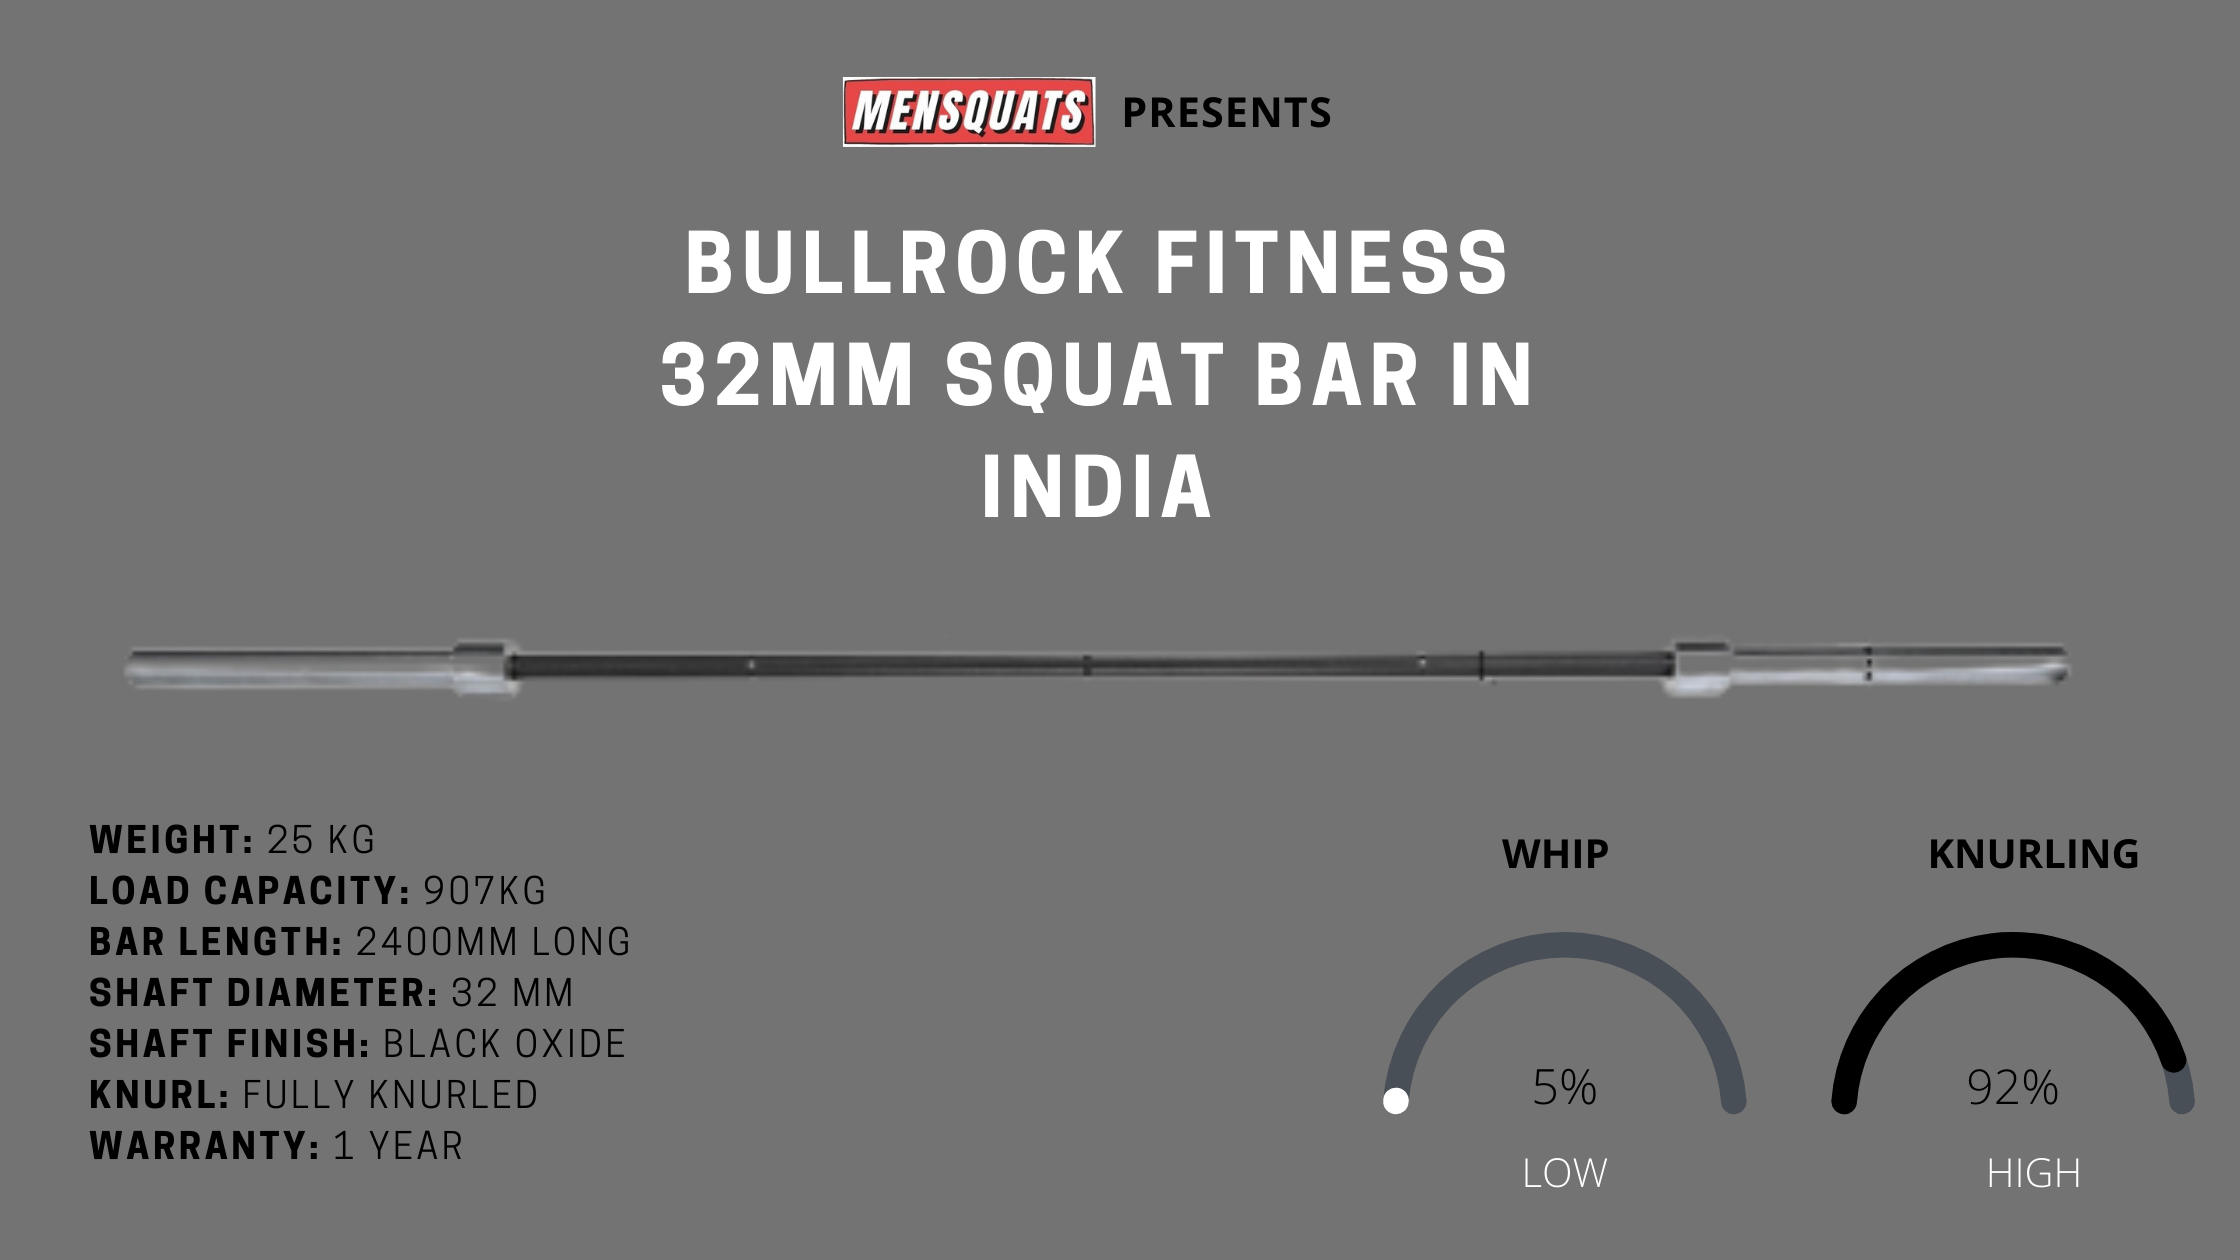 32 mm squat bar in India from bullrock fitness